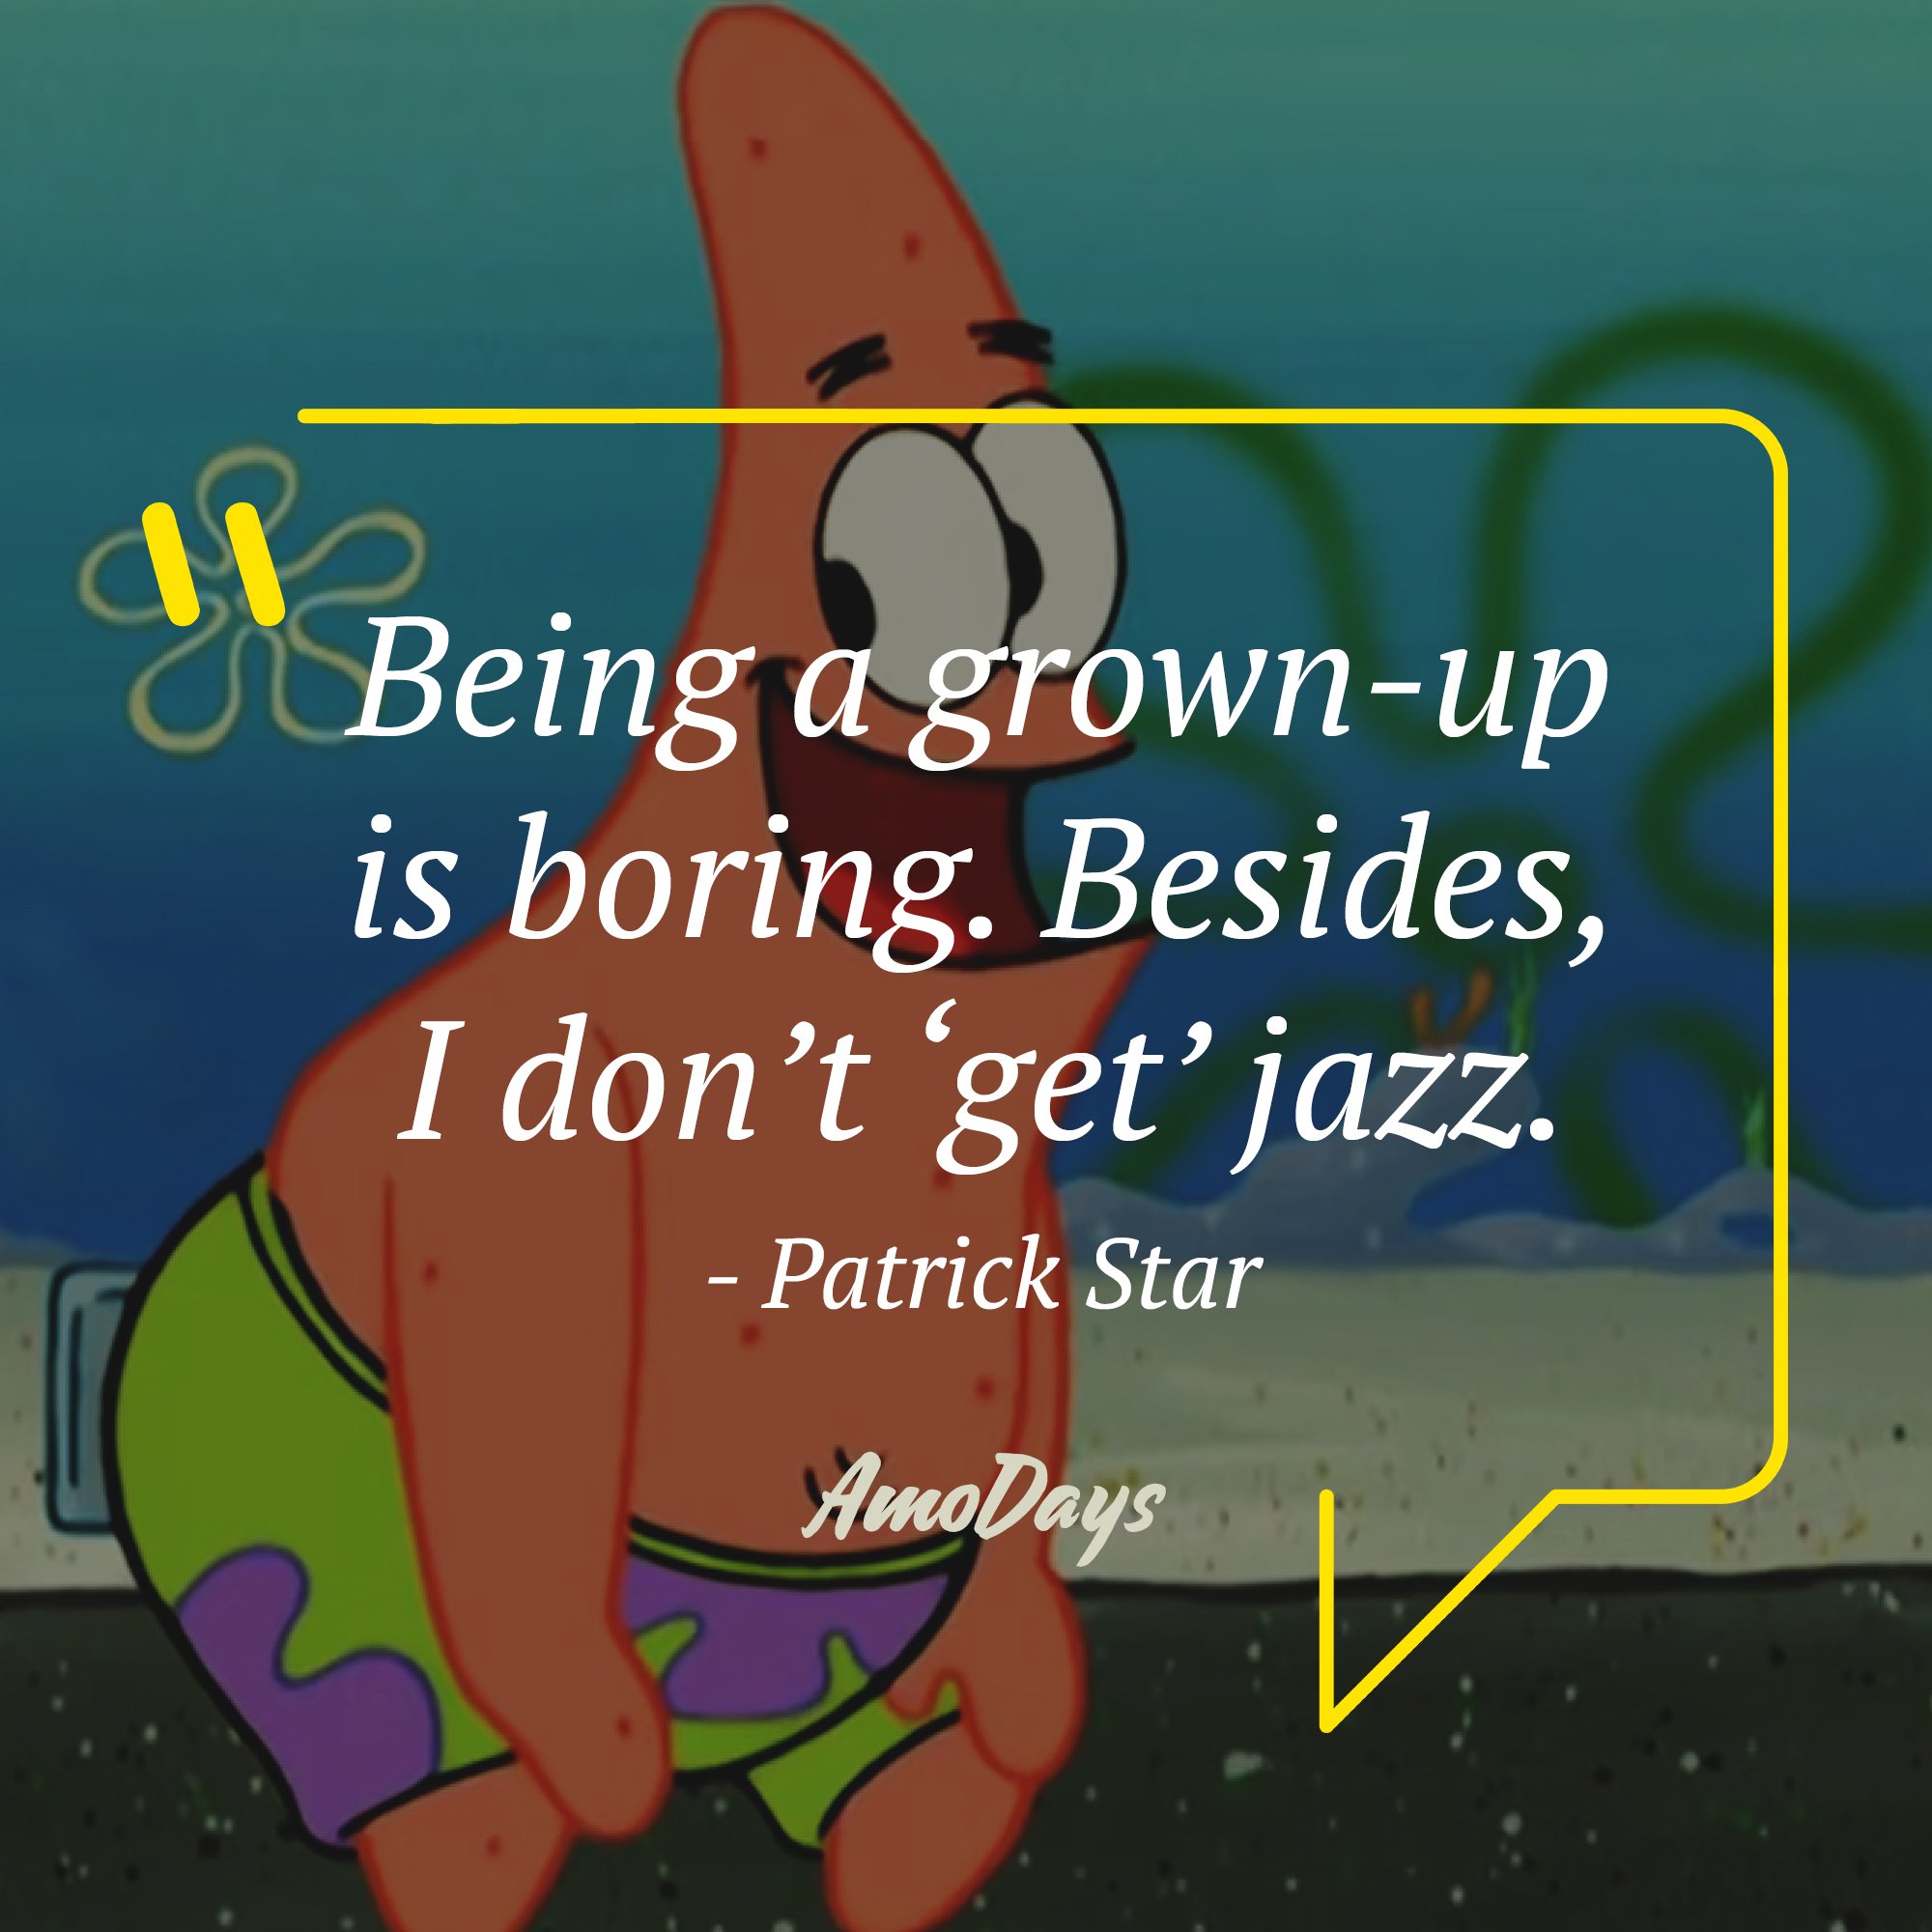 Patrick Star's quote: "Being grown-up is boring. Besides, I don’t ‘get’ jazz." | Image: AmoDays